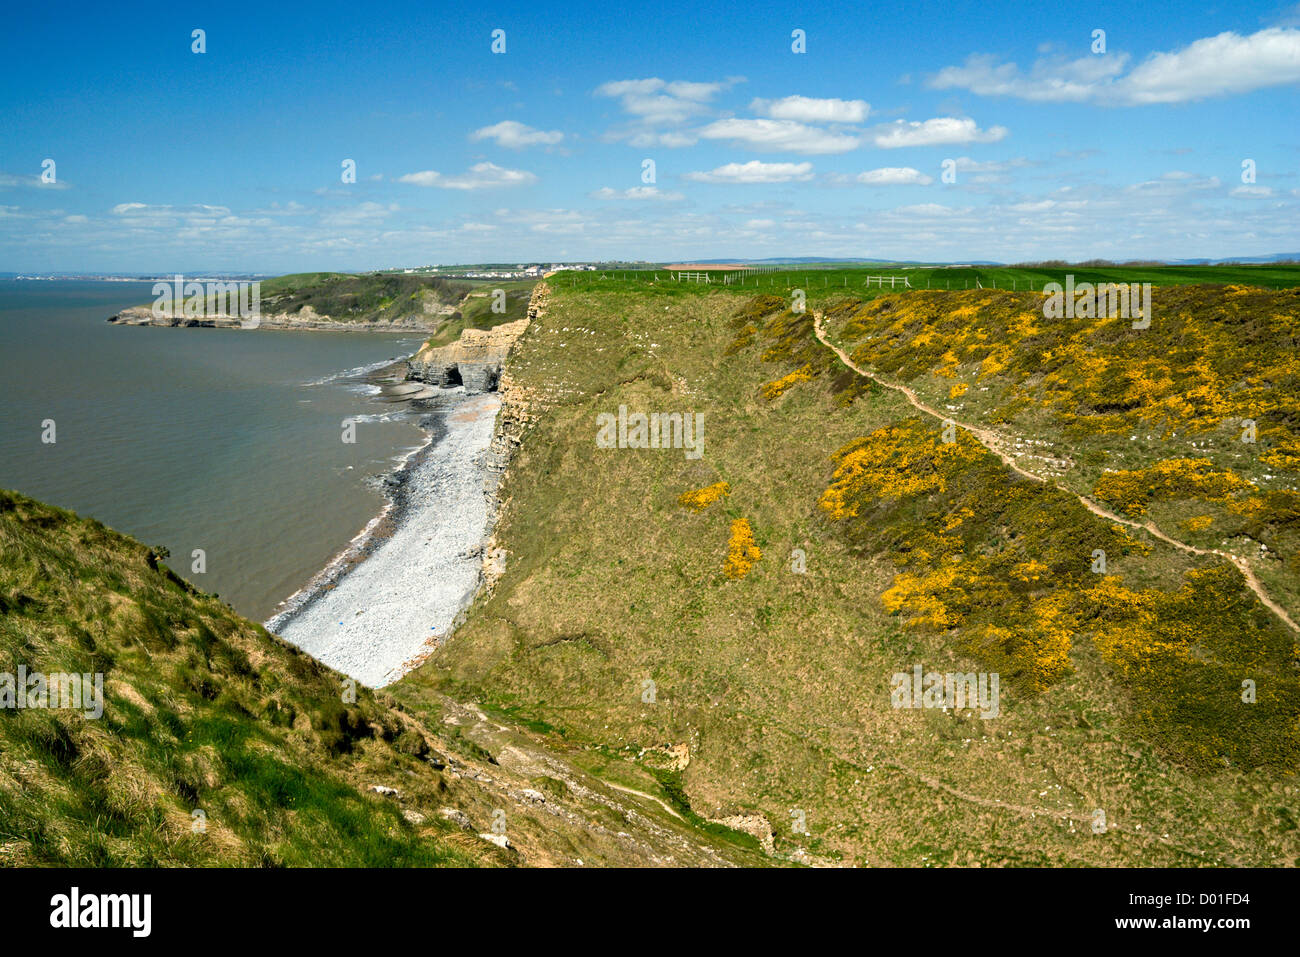 The Glamourgan Heritage Coast, Vale of Glamourgan, pays de Galles du Sud, Royaume-Uni. Banque D'Images